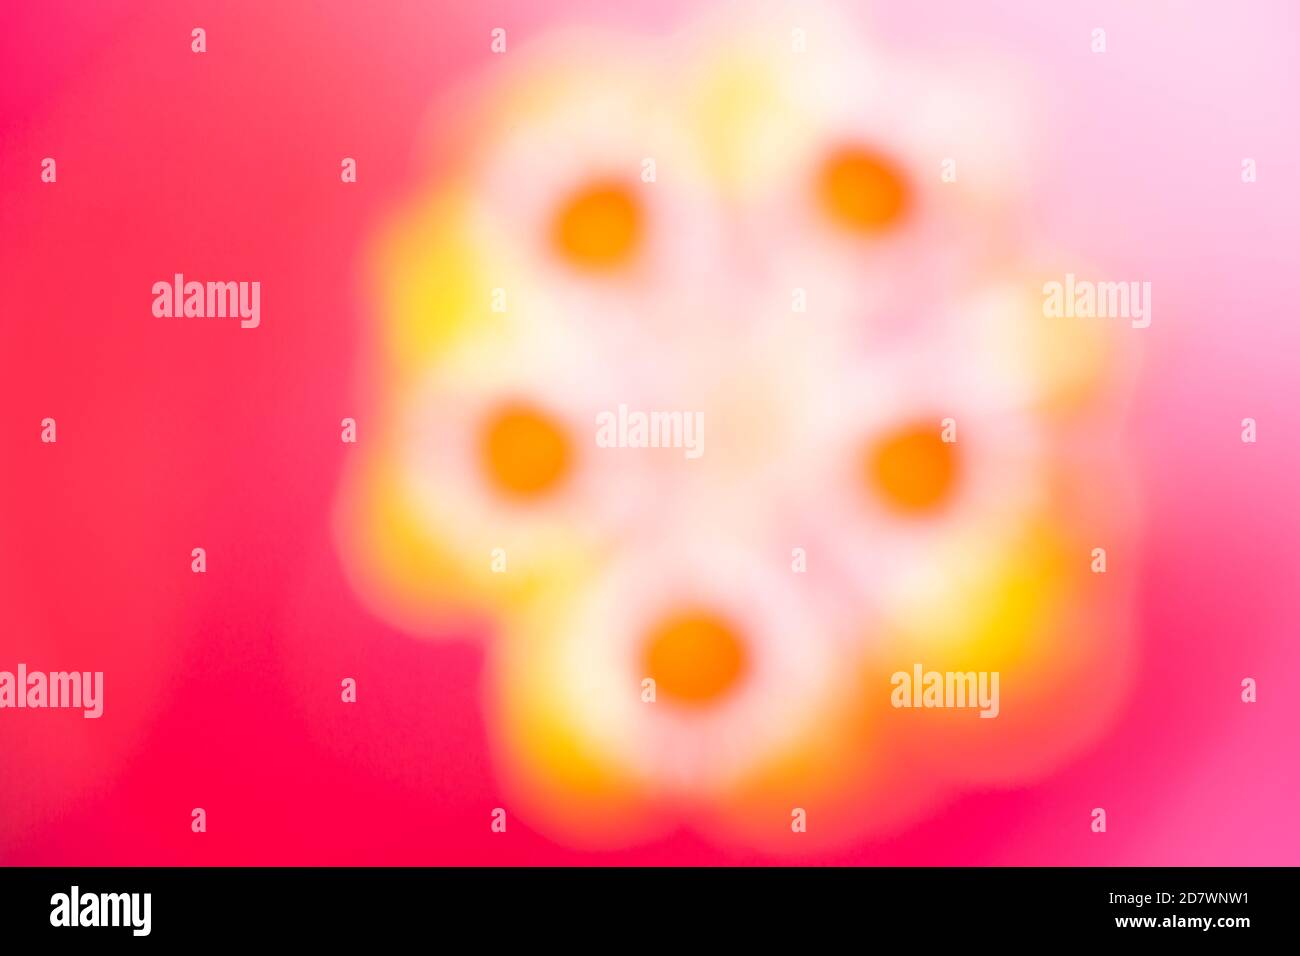 Abstract Background of Blurred Hibiscus Juno Stock Photo